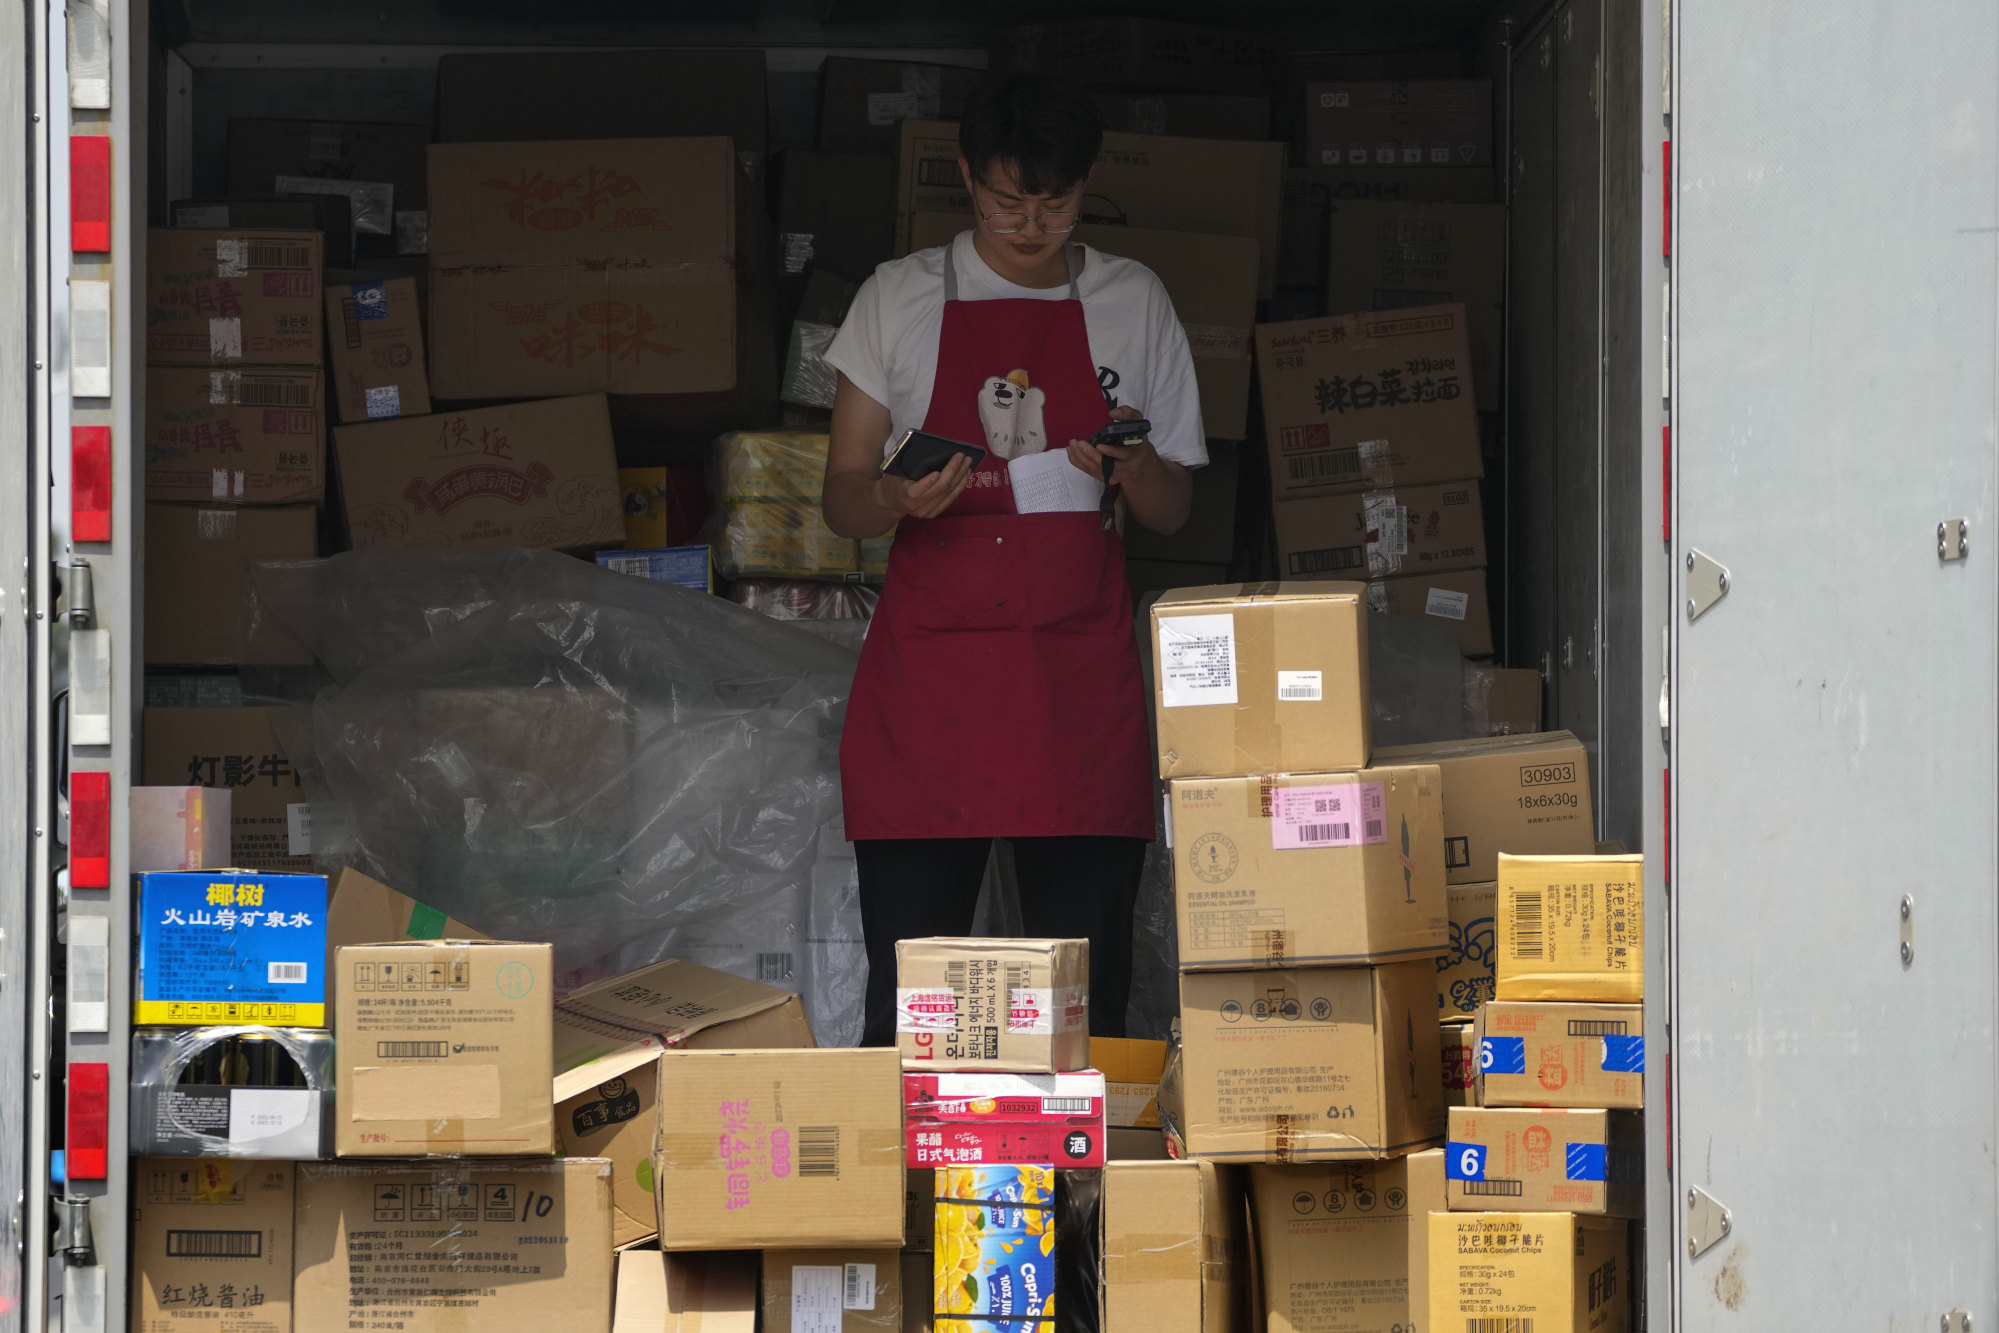 A worker take stock inside a truck loaded with goods in Beijing. Photo: AP Photo